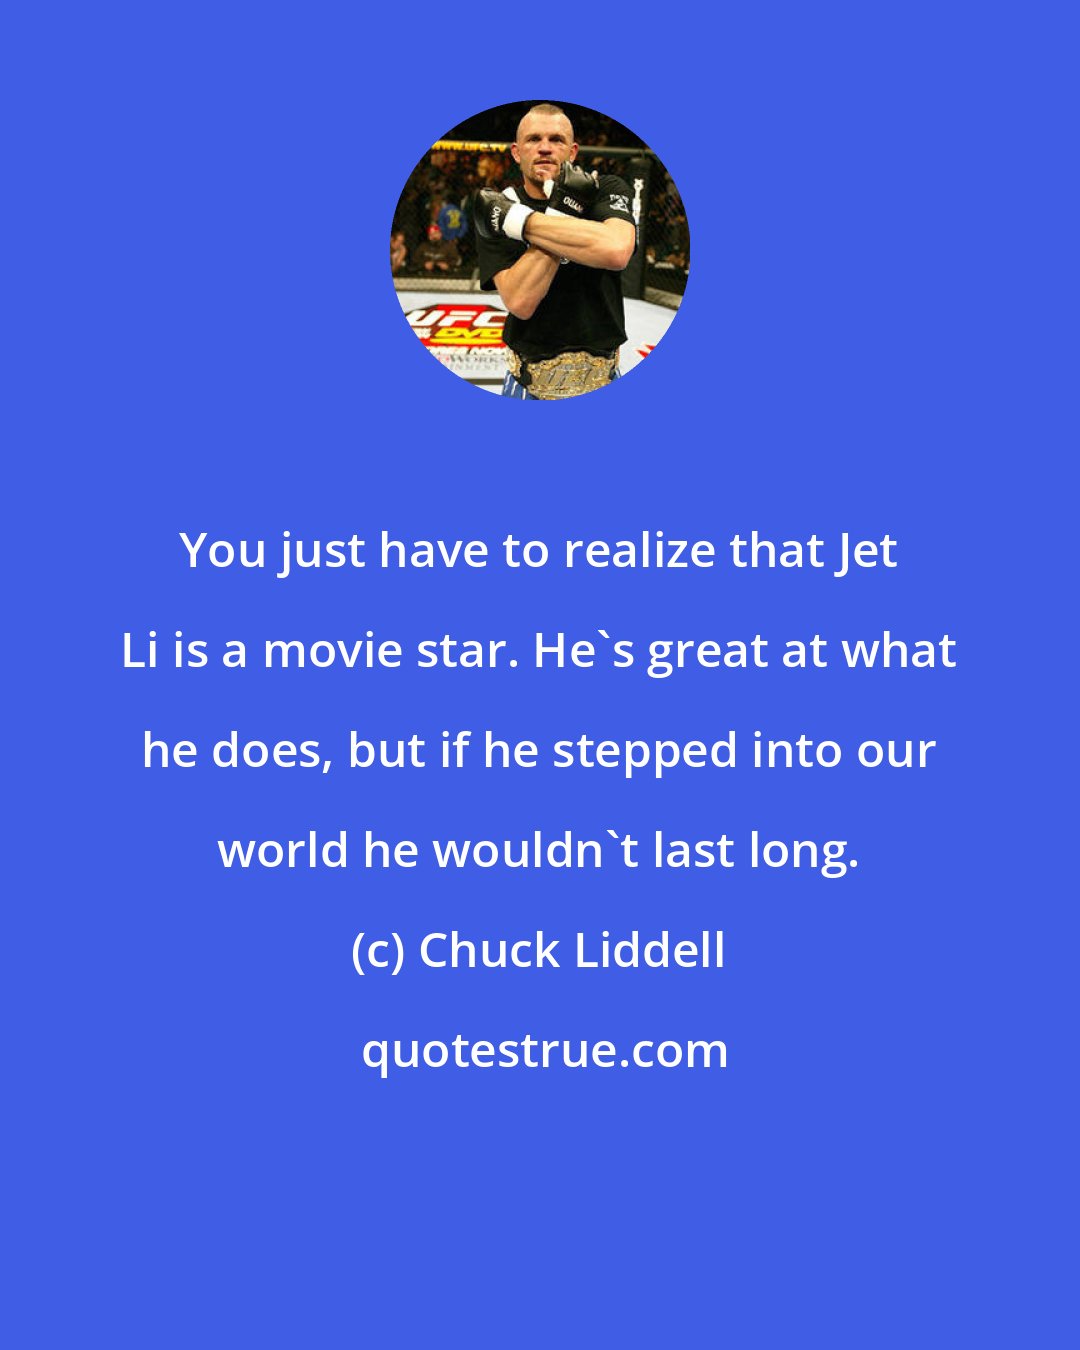 Chuck Liddell: You just have to realize that Jet Li is a movie star. He's great at what he does, but if he stepped into our world he wouldn't last long.